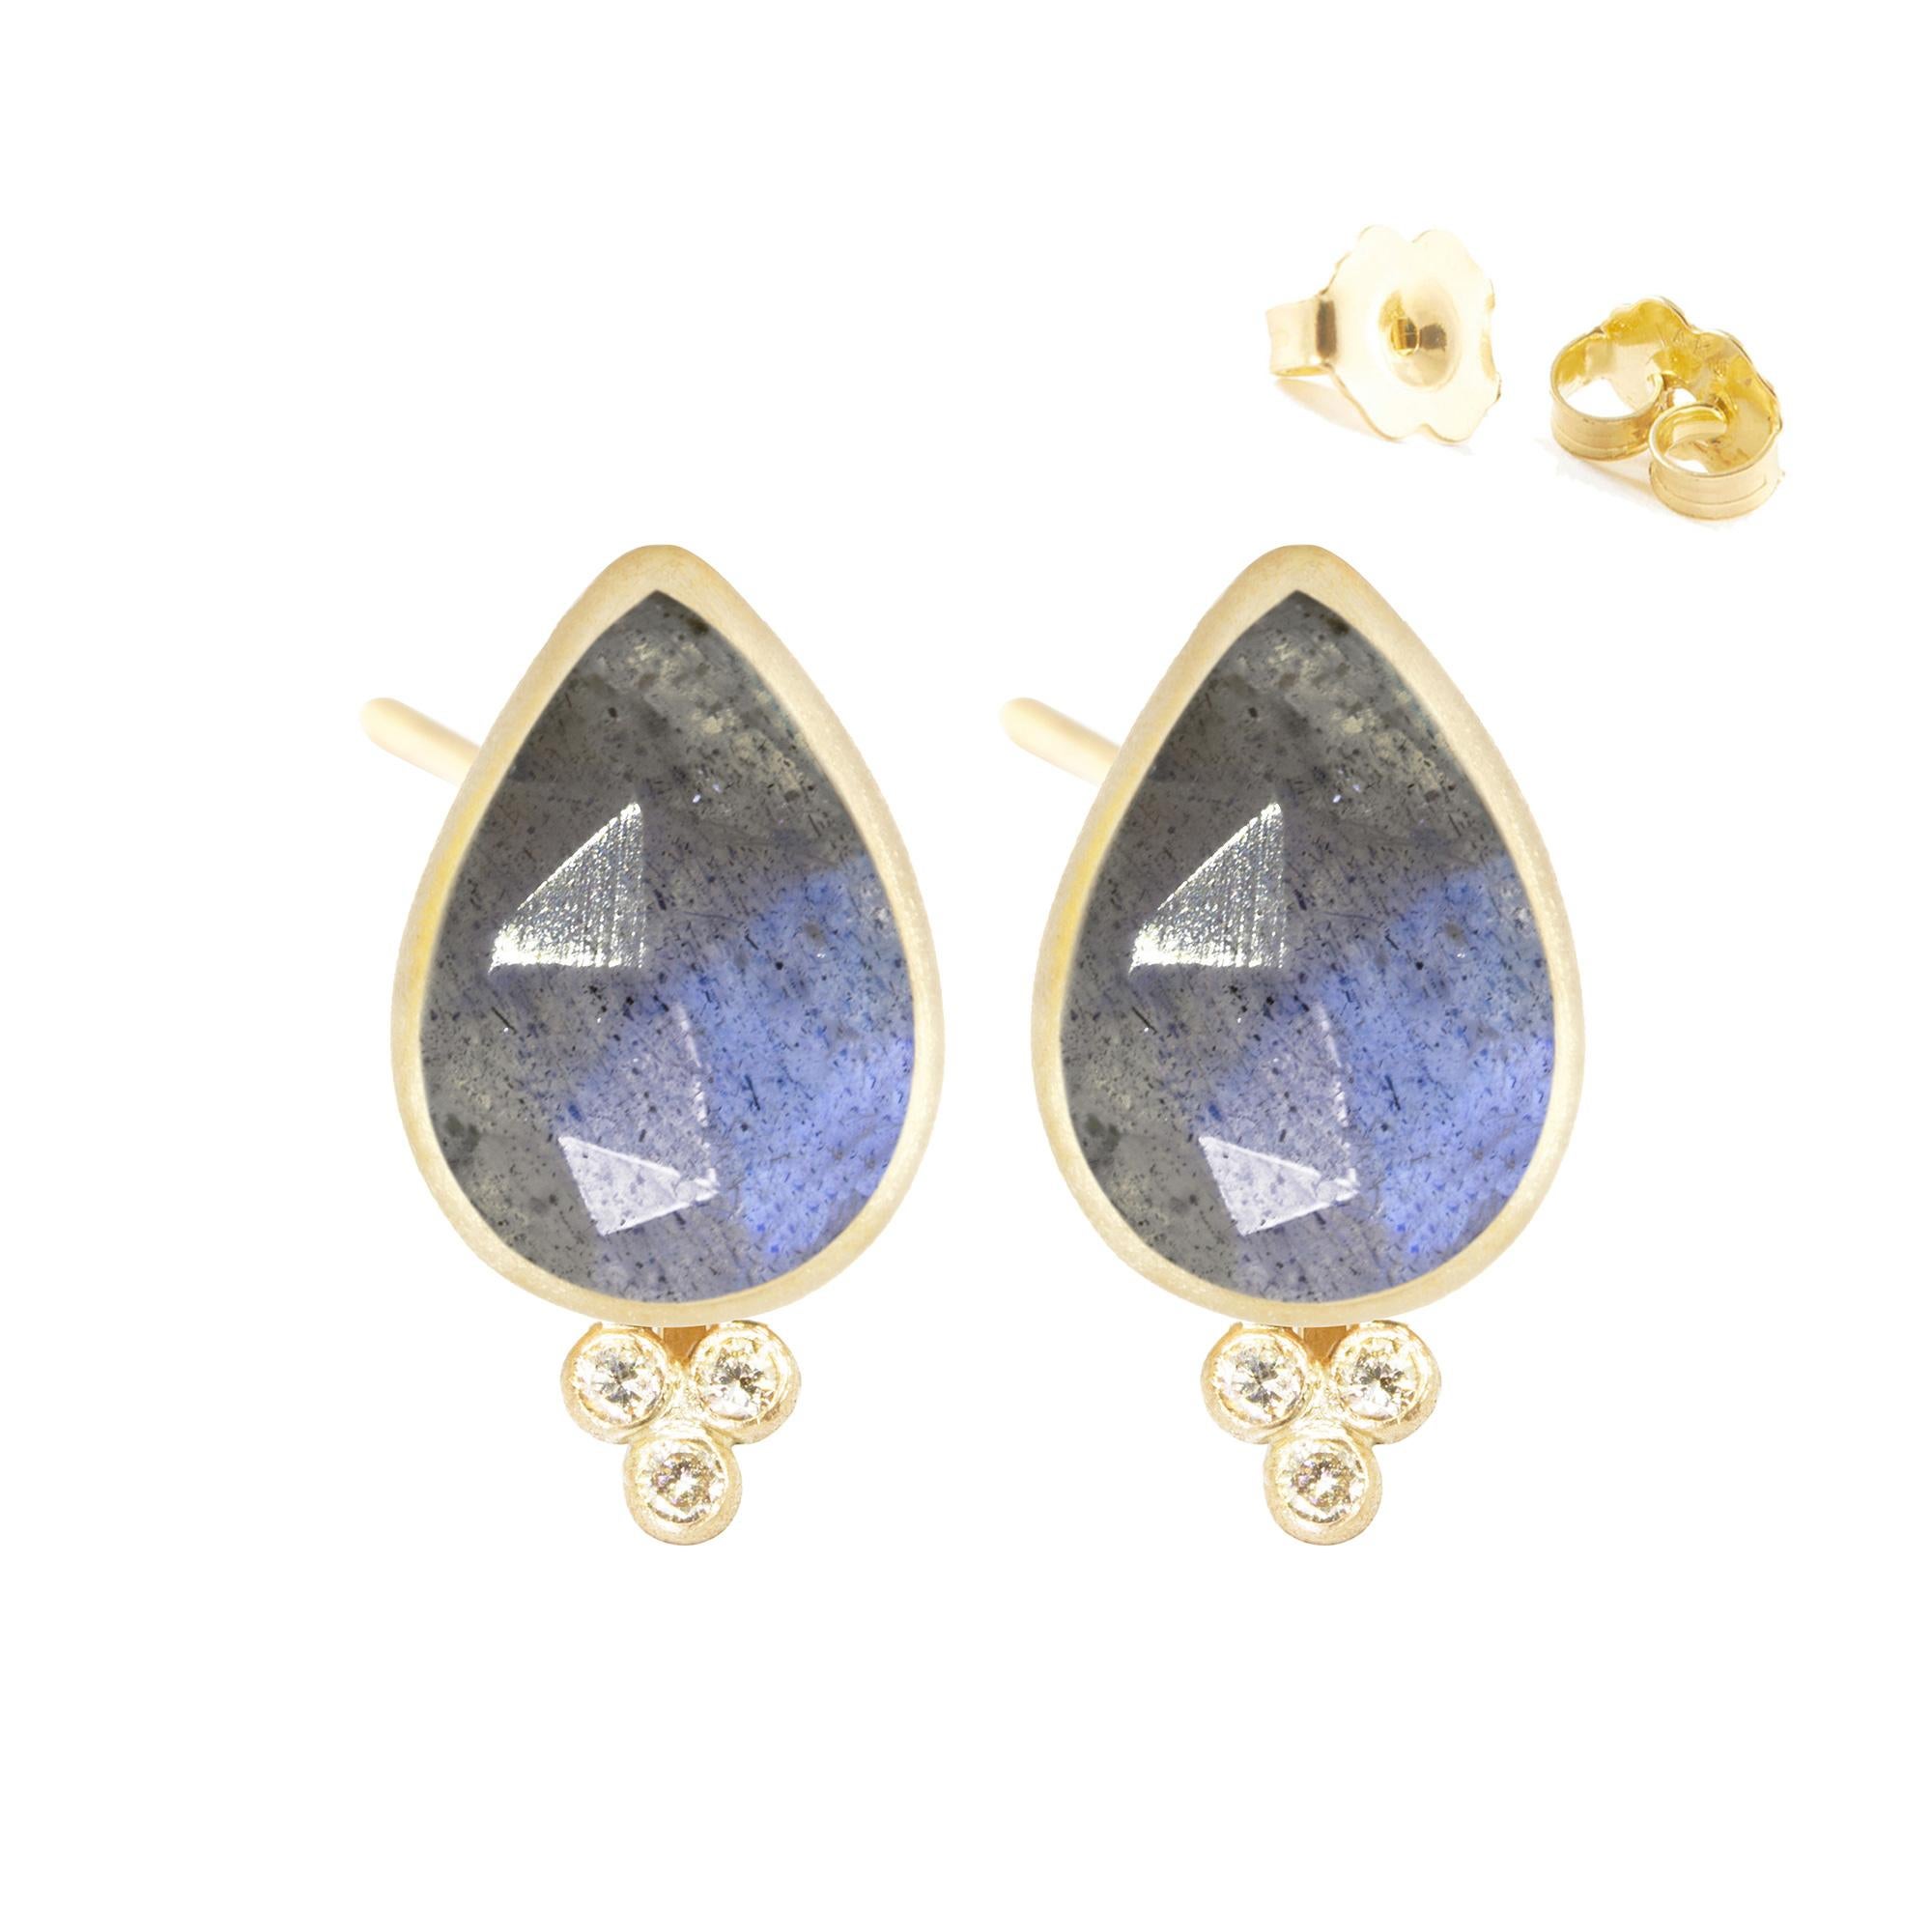 With faceted labradorite in a petal-like pear shape and sparkling diamonds, the Mia Small Gold Studs bloom to their fullest potential when you wear them with denim, linen, cashmere…basically everything in your closet.
Nina Nguyen Design's